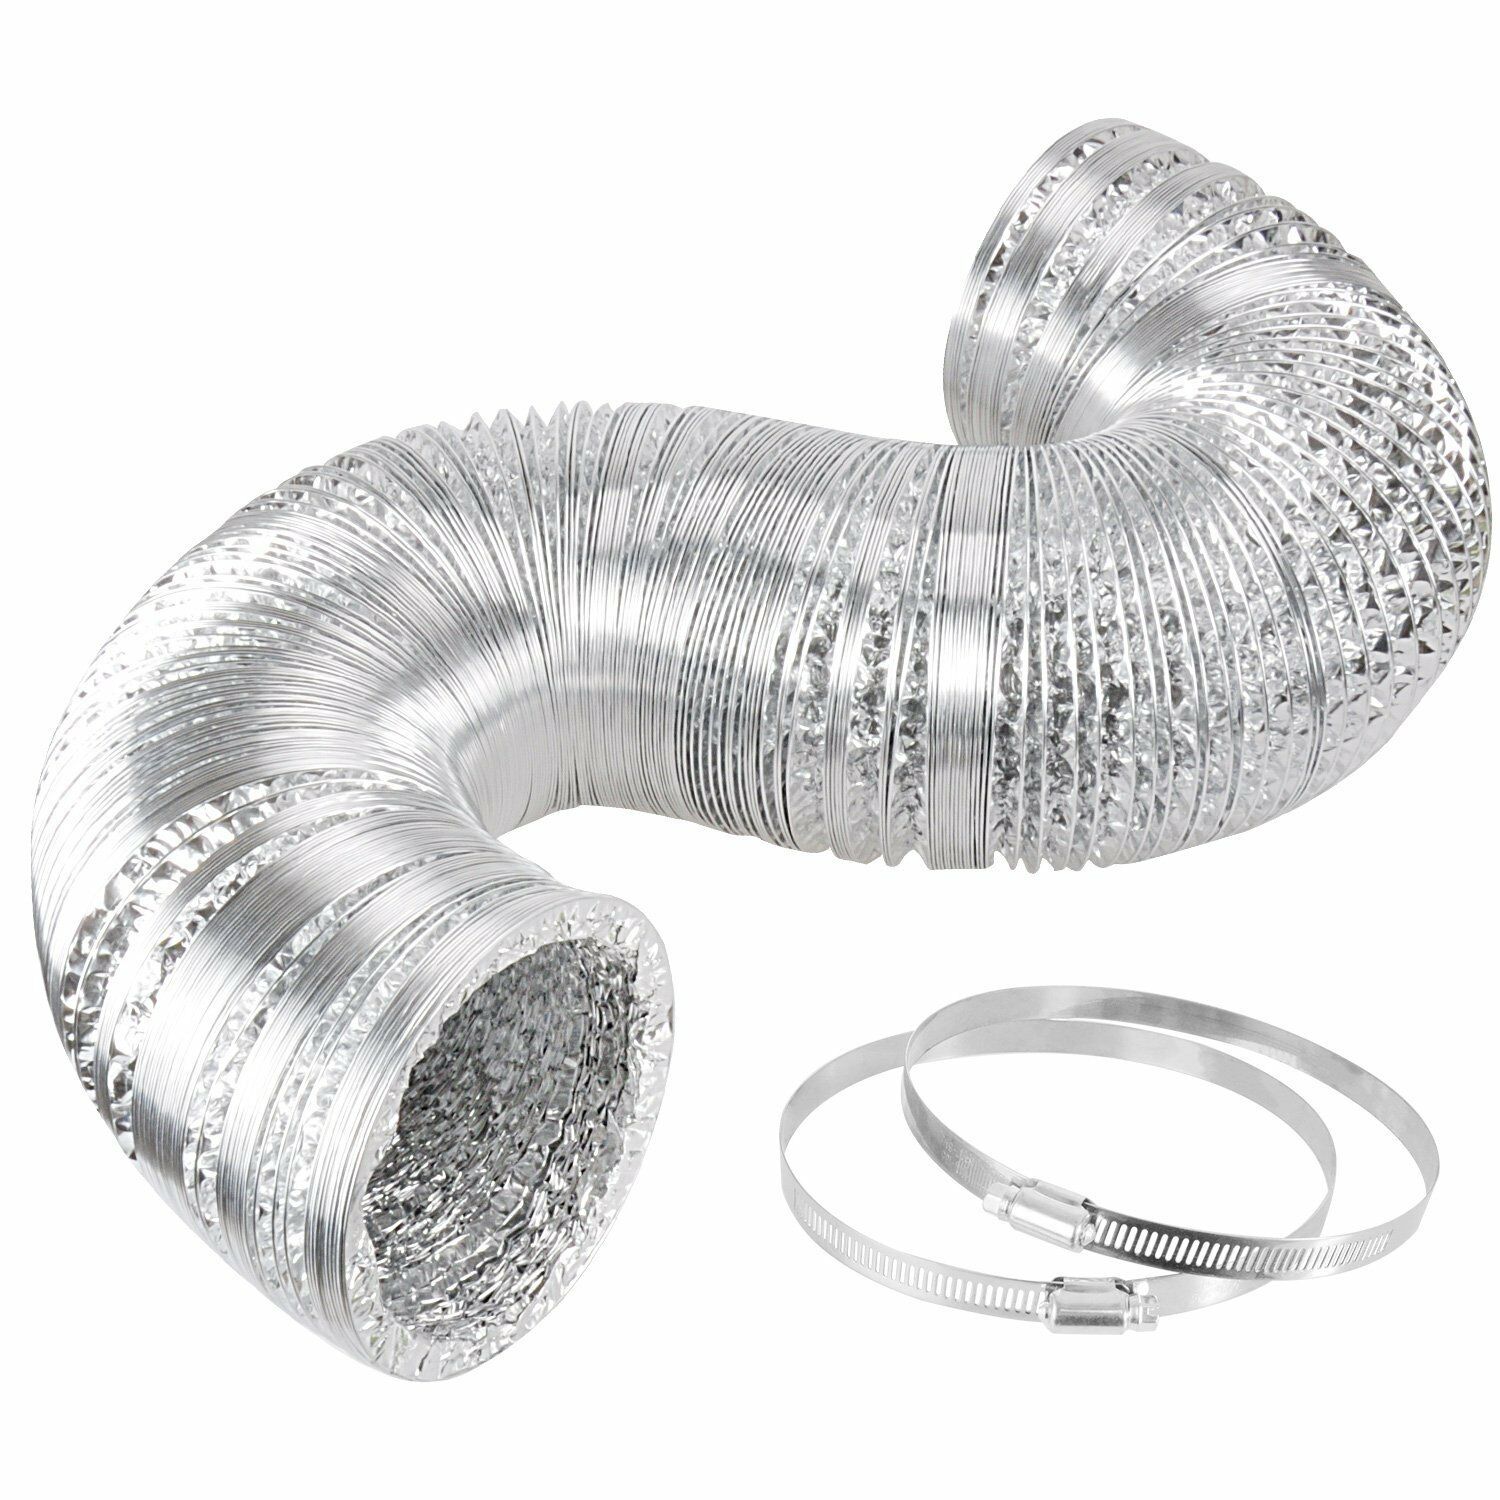 Ipower 6" Inch Non-insulated Flexible Aluminum Air Ducting Dry Ventilation Hose